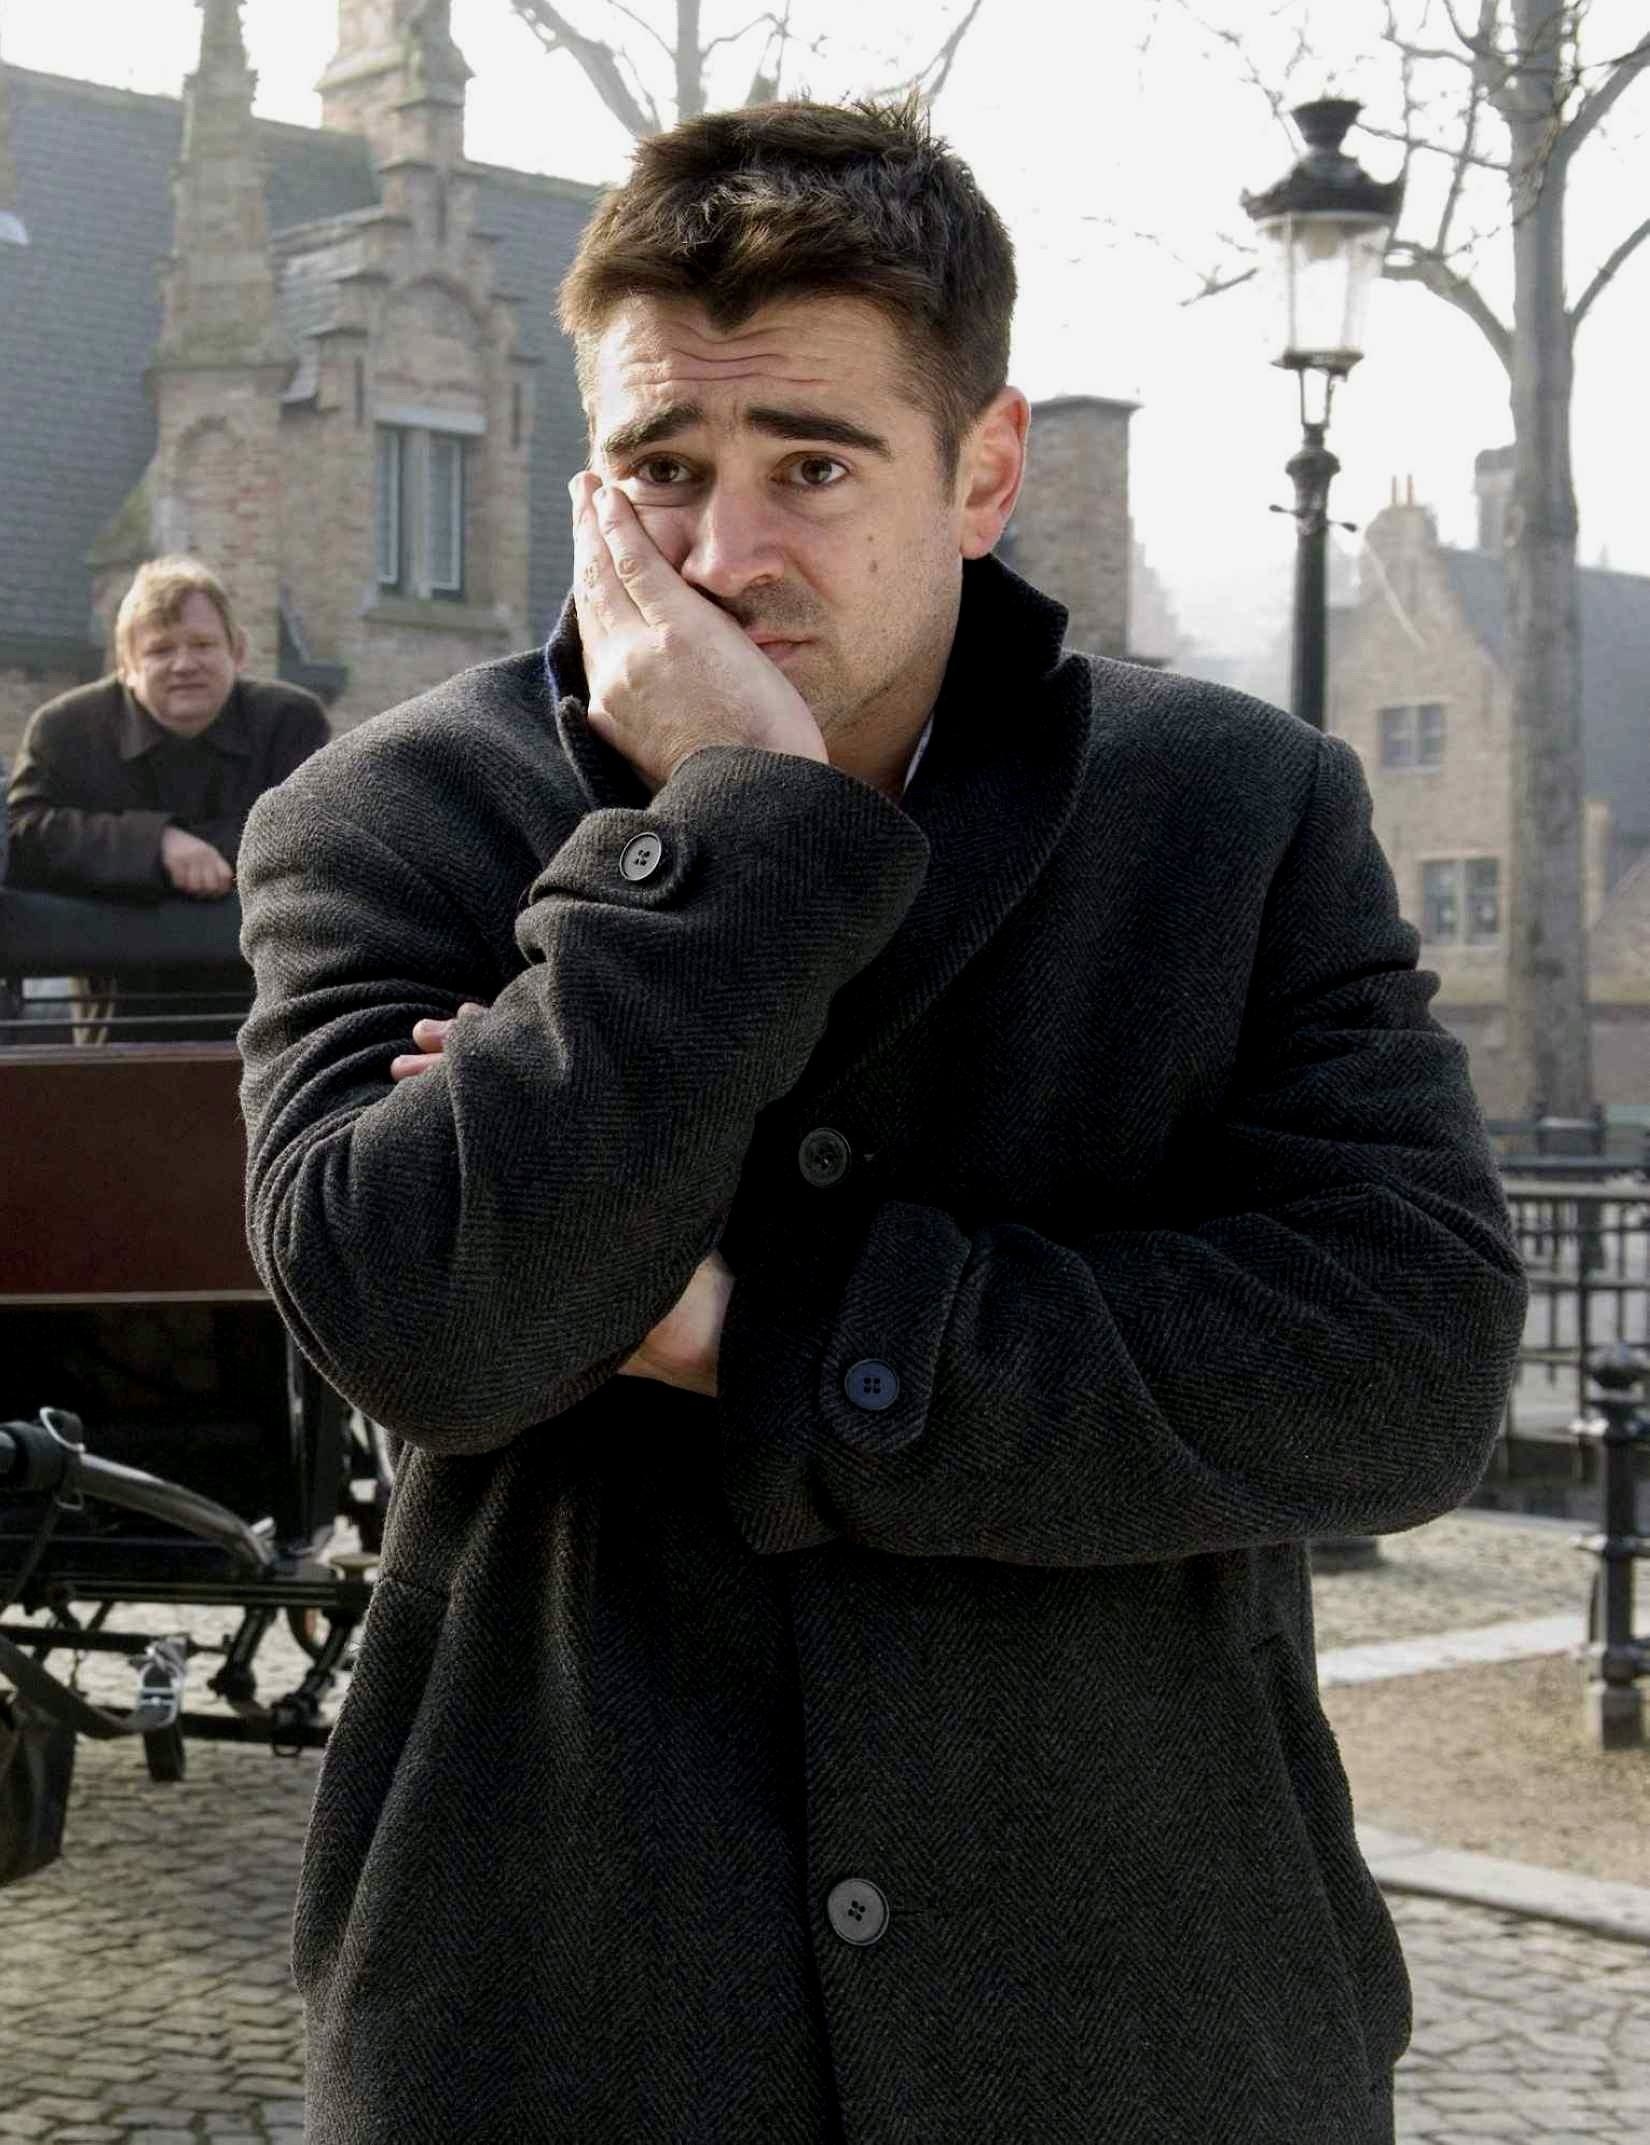 Colin Farrell stands with his right hand covering half of his mouth and all of his cheek